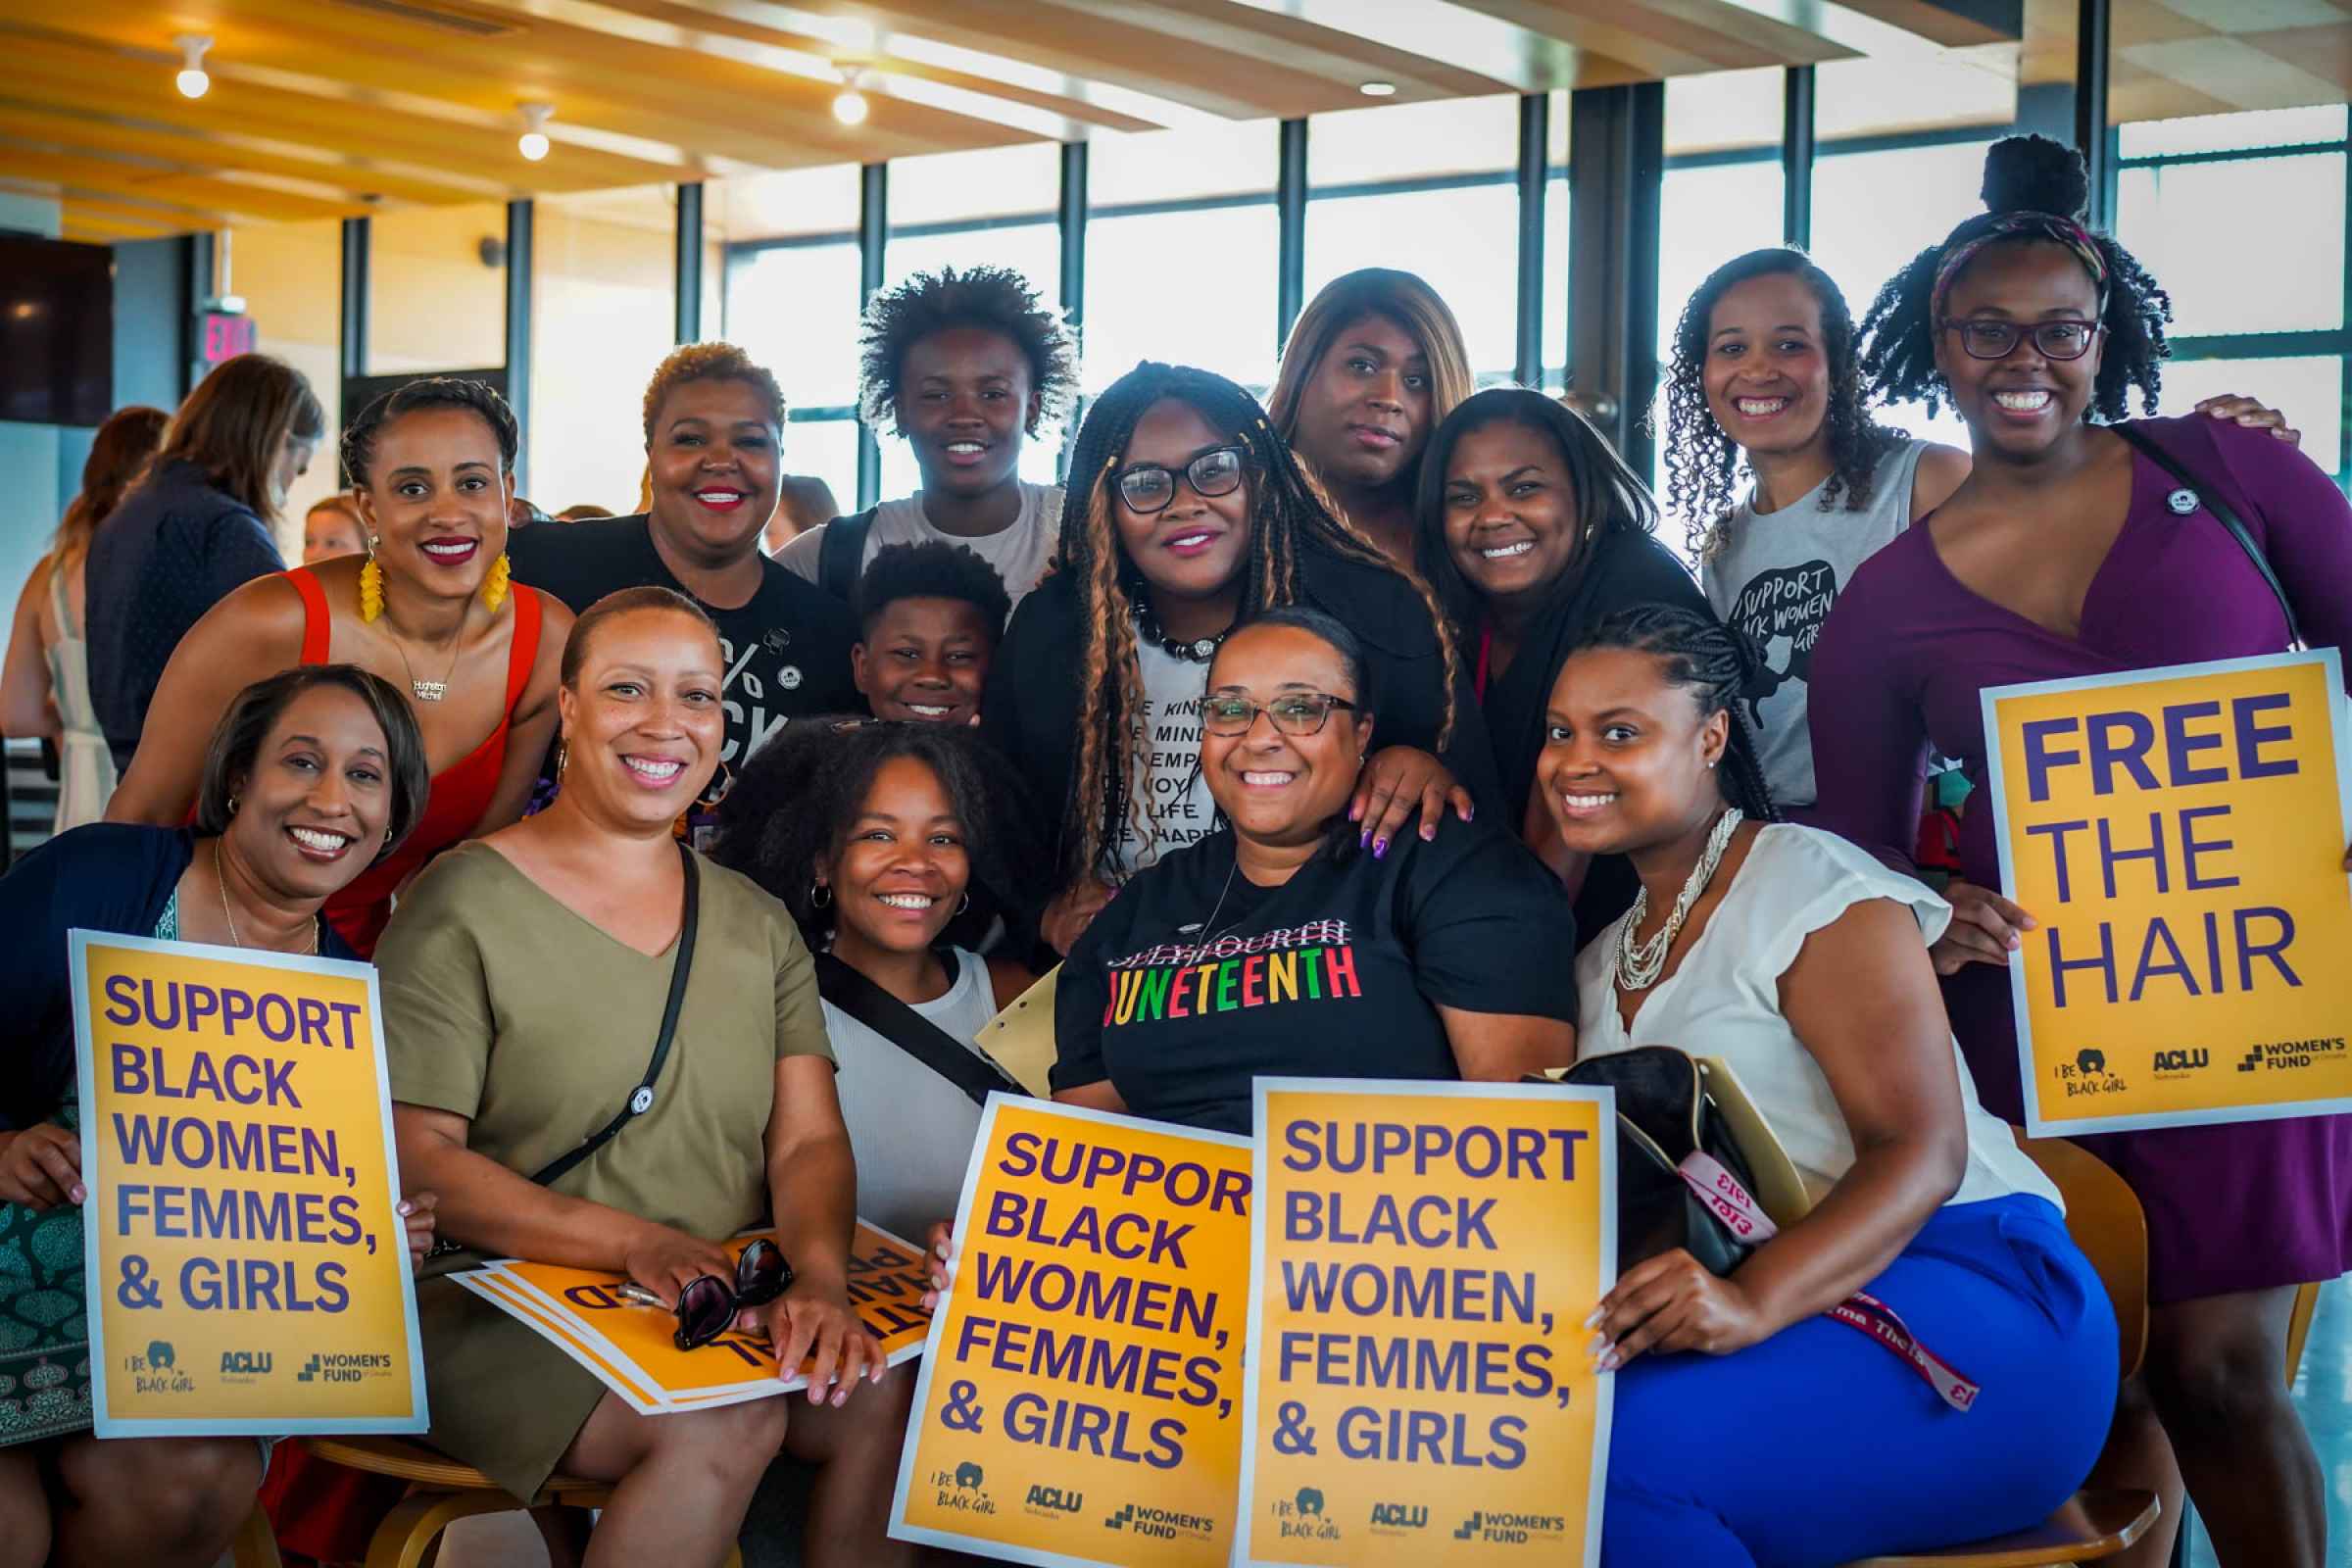 A group of women pose for a photo holding signs reading "Support Black Women, Femmes & Girls"